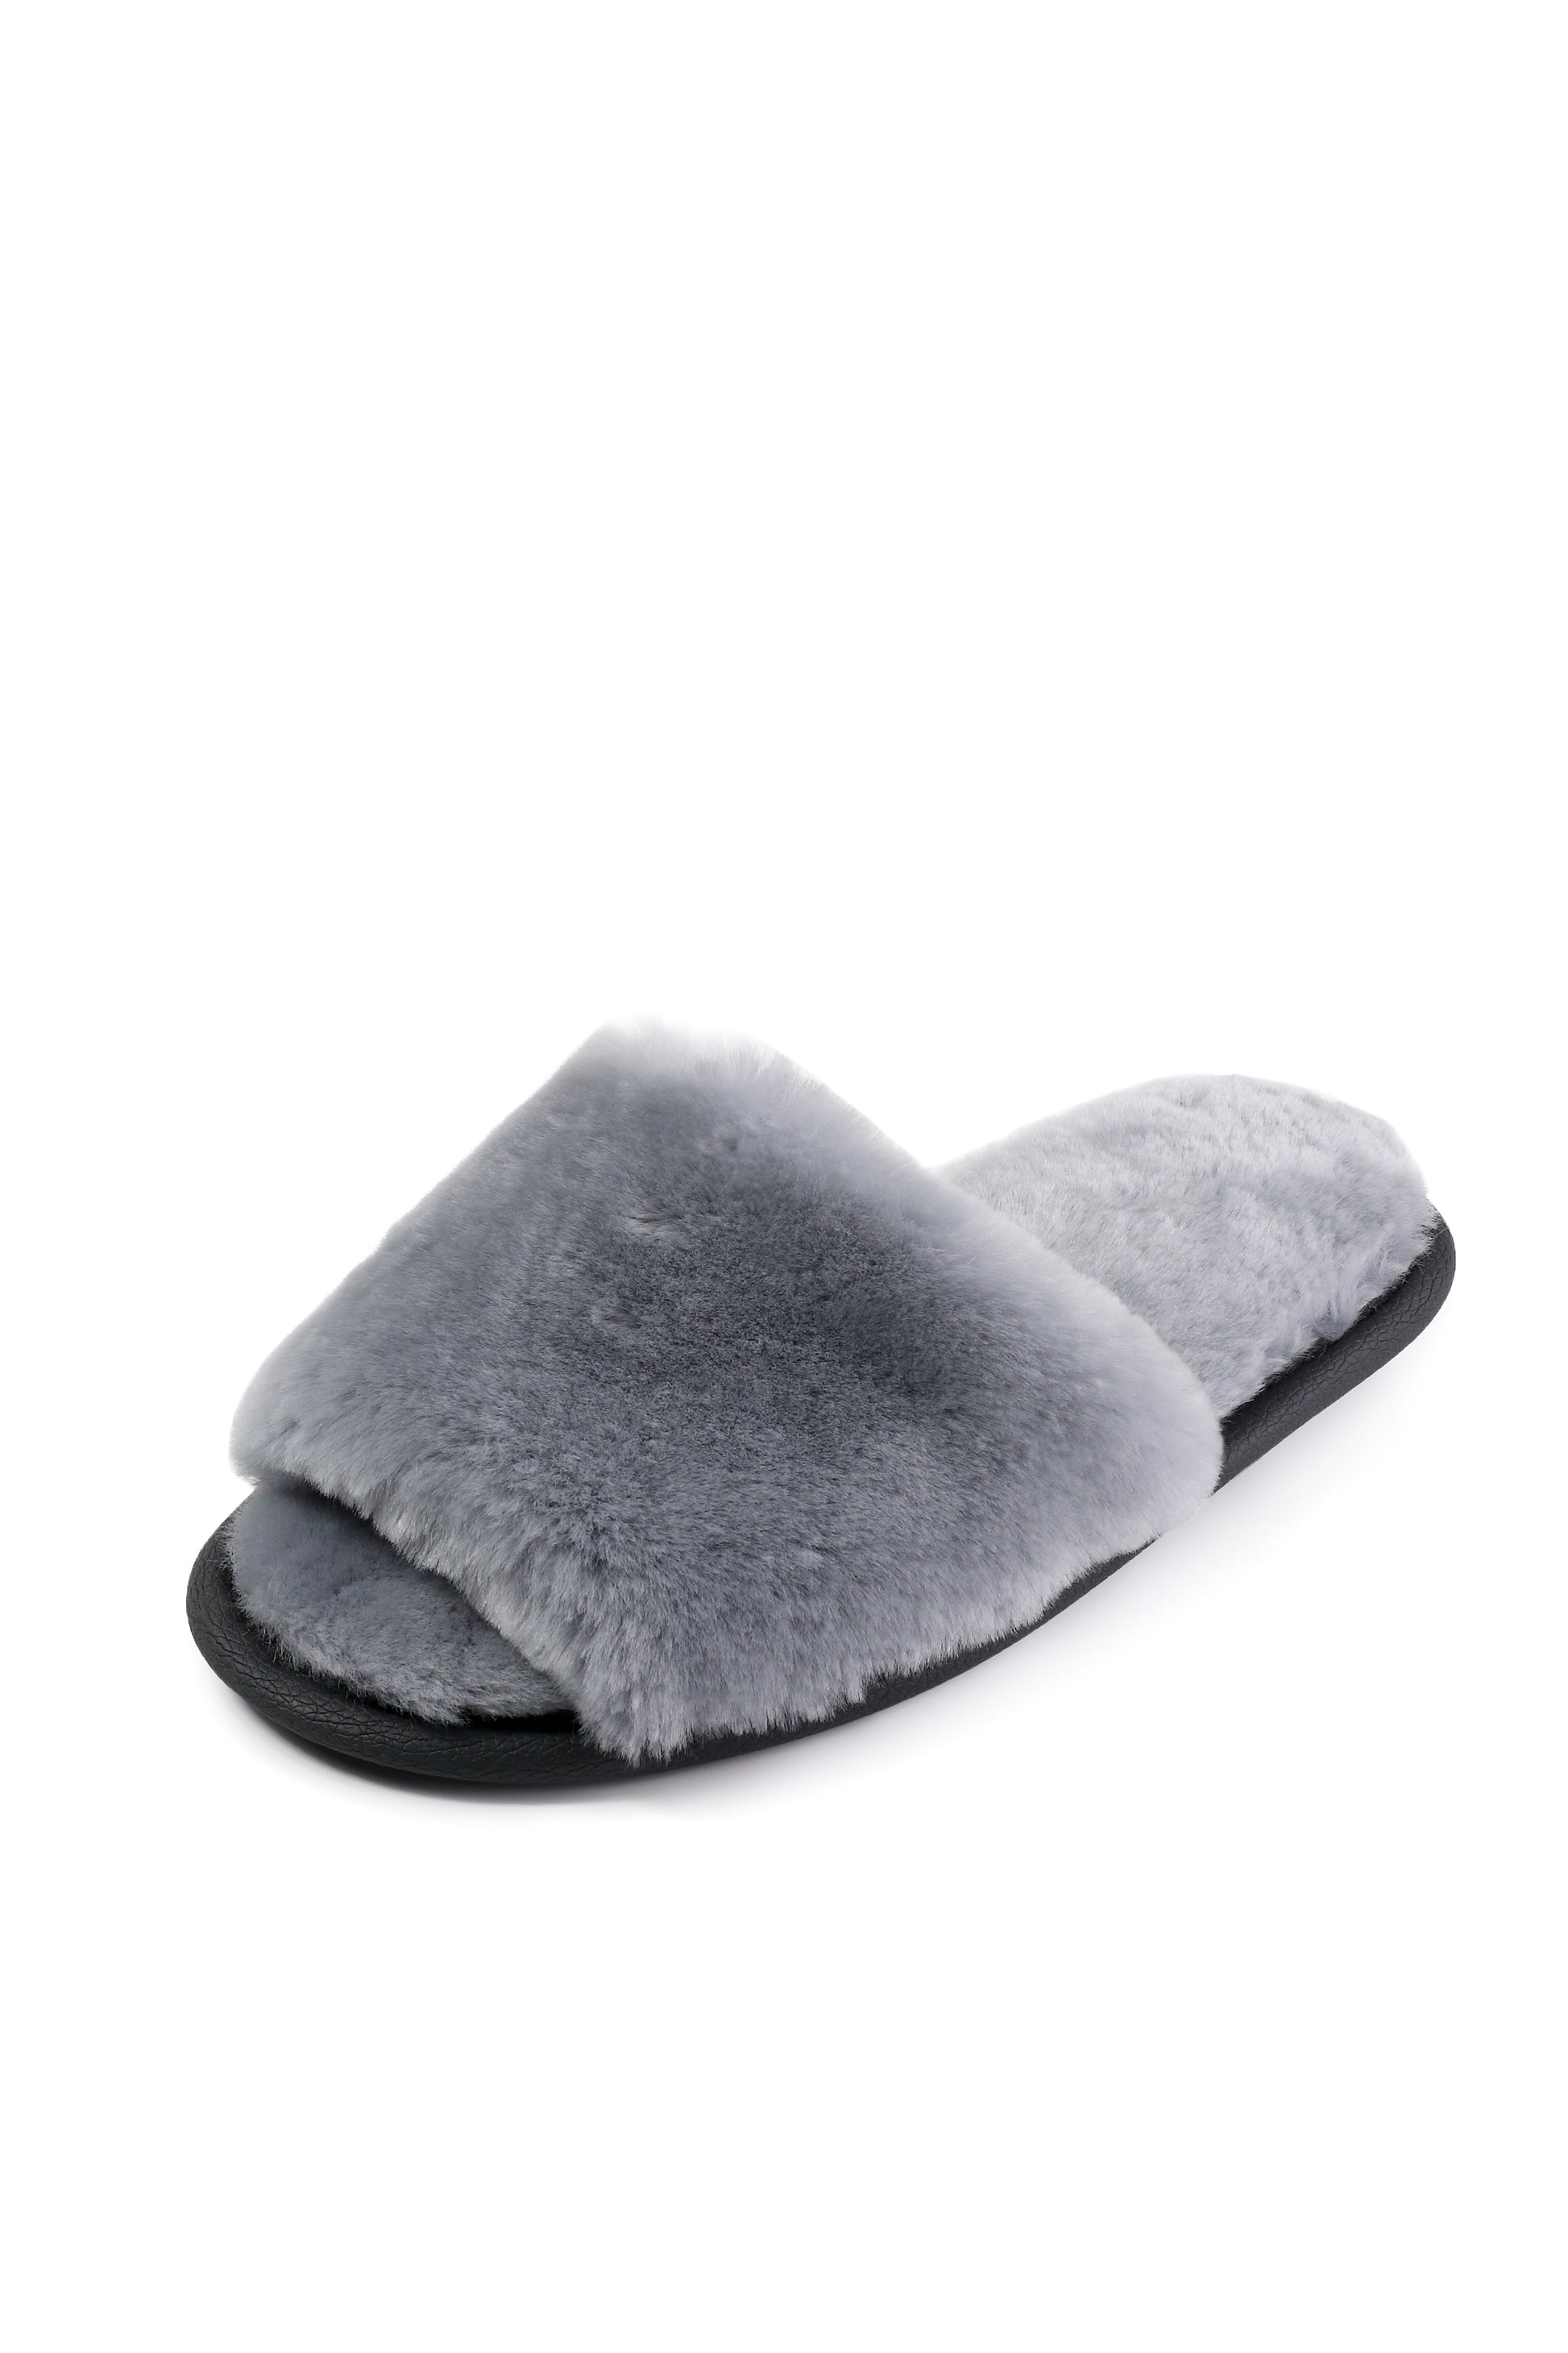 Soft Open Toe Sheepskin Mule Slippers for Women in Grey Color with Fur Lining